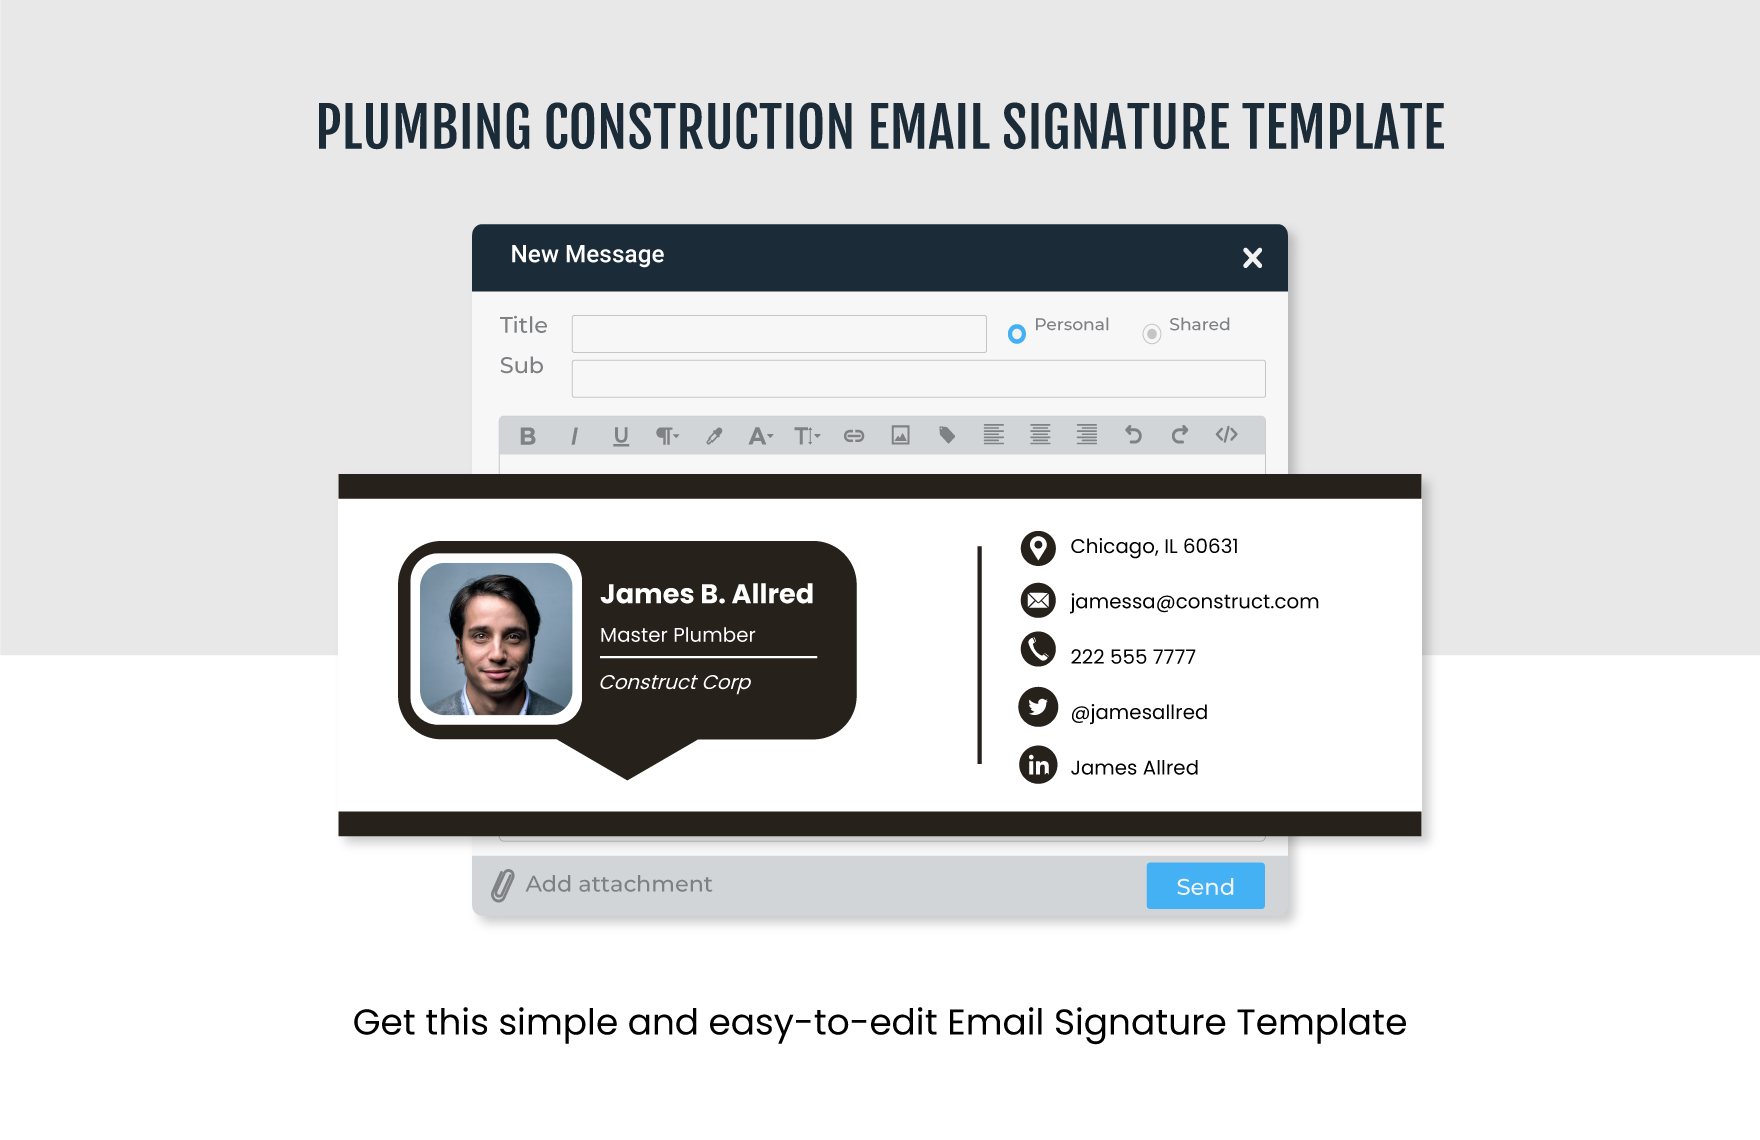 Plumbing Construction Email Signature Template in Word, Illustrator, PSD